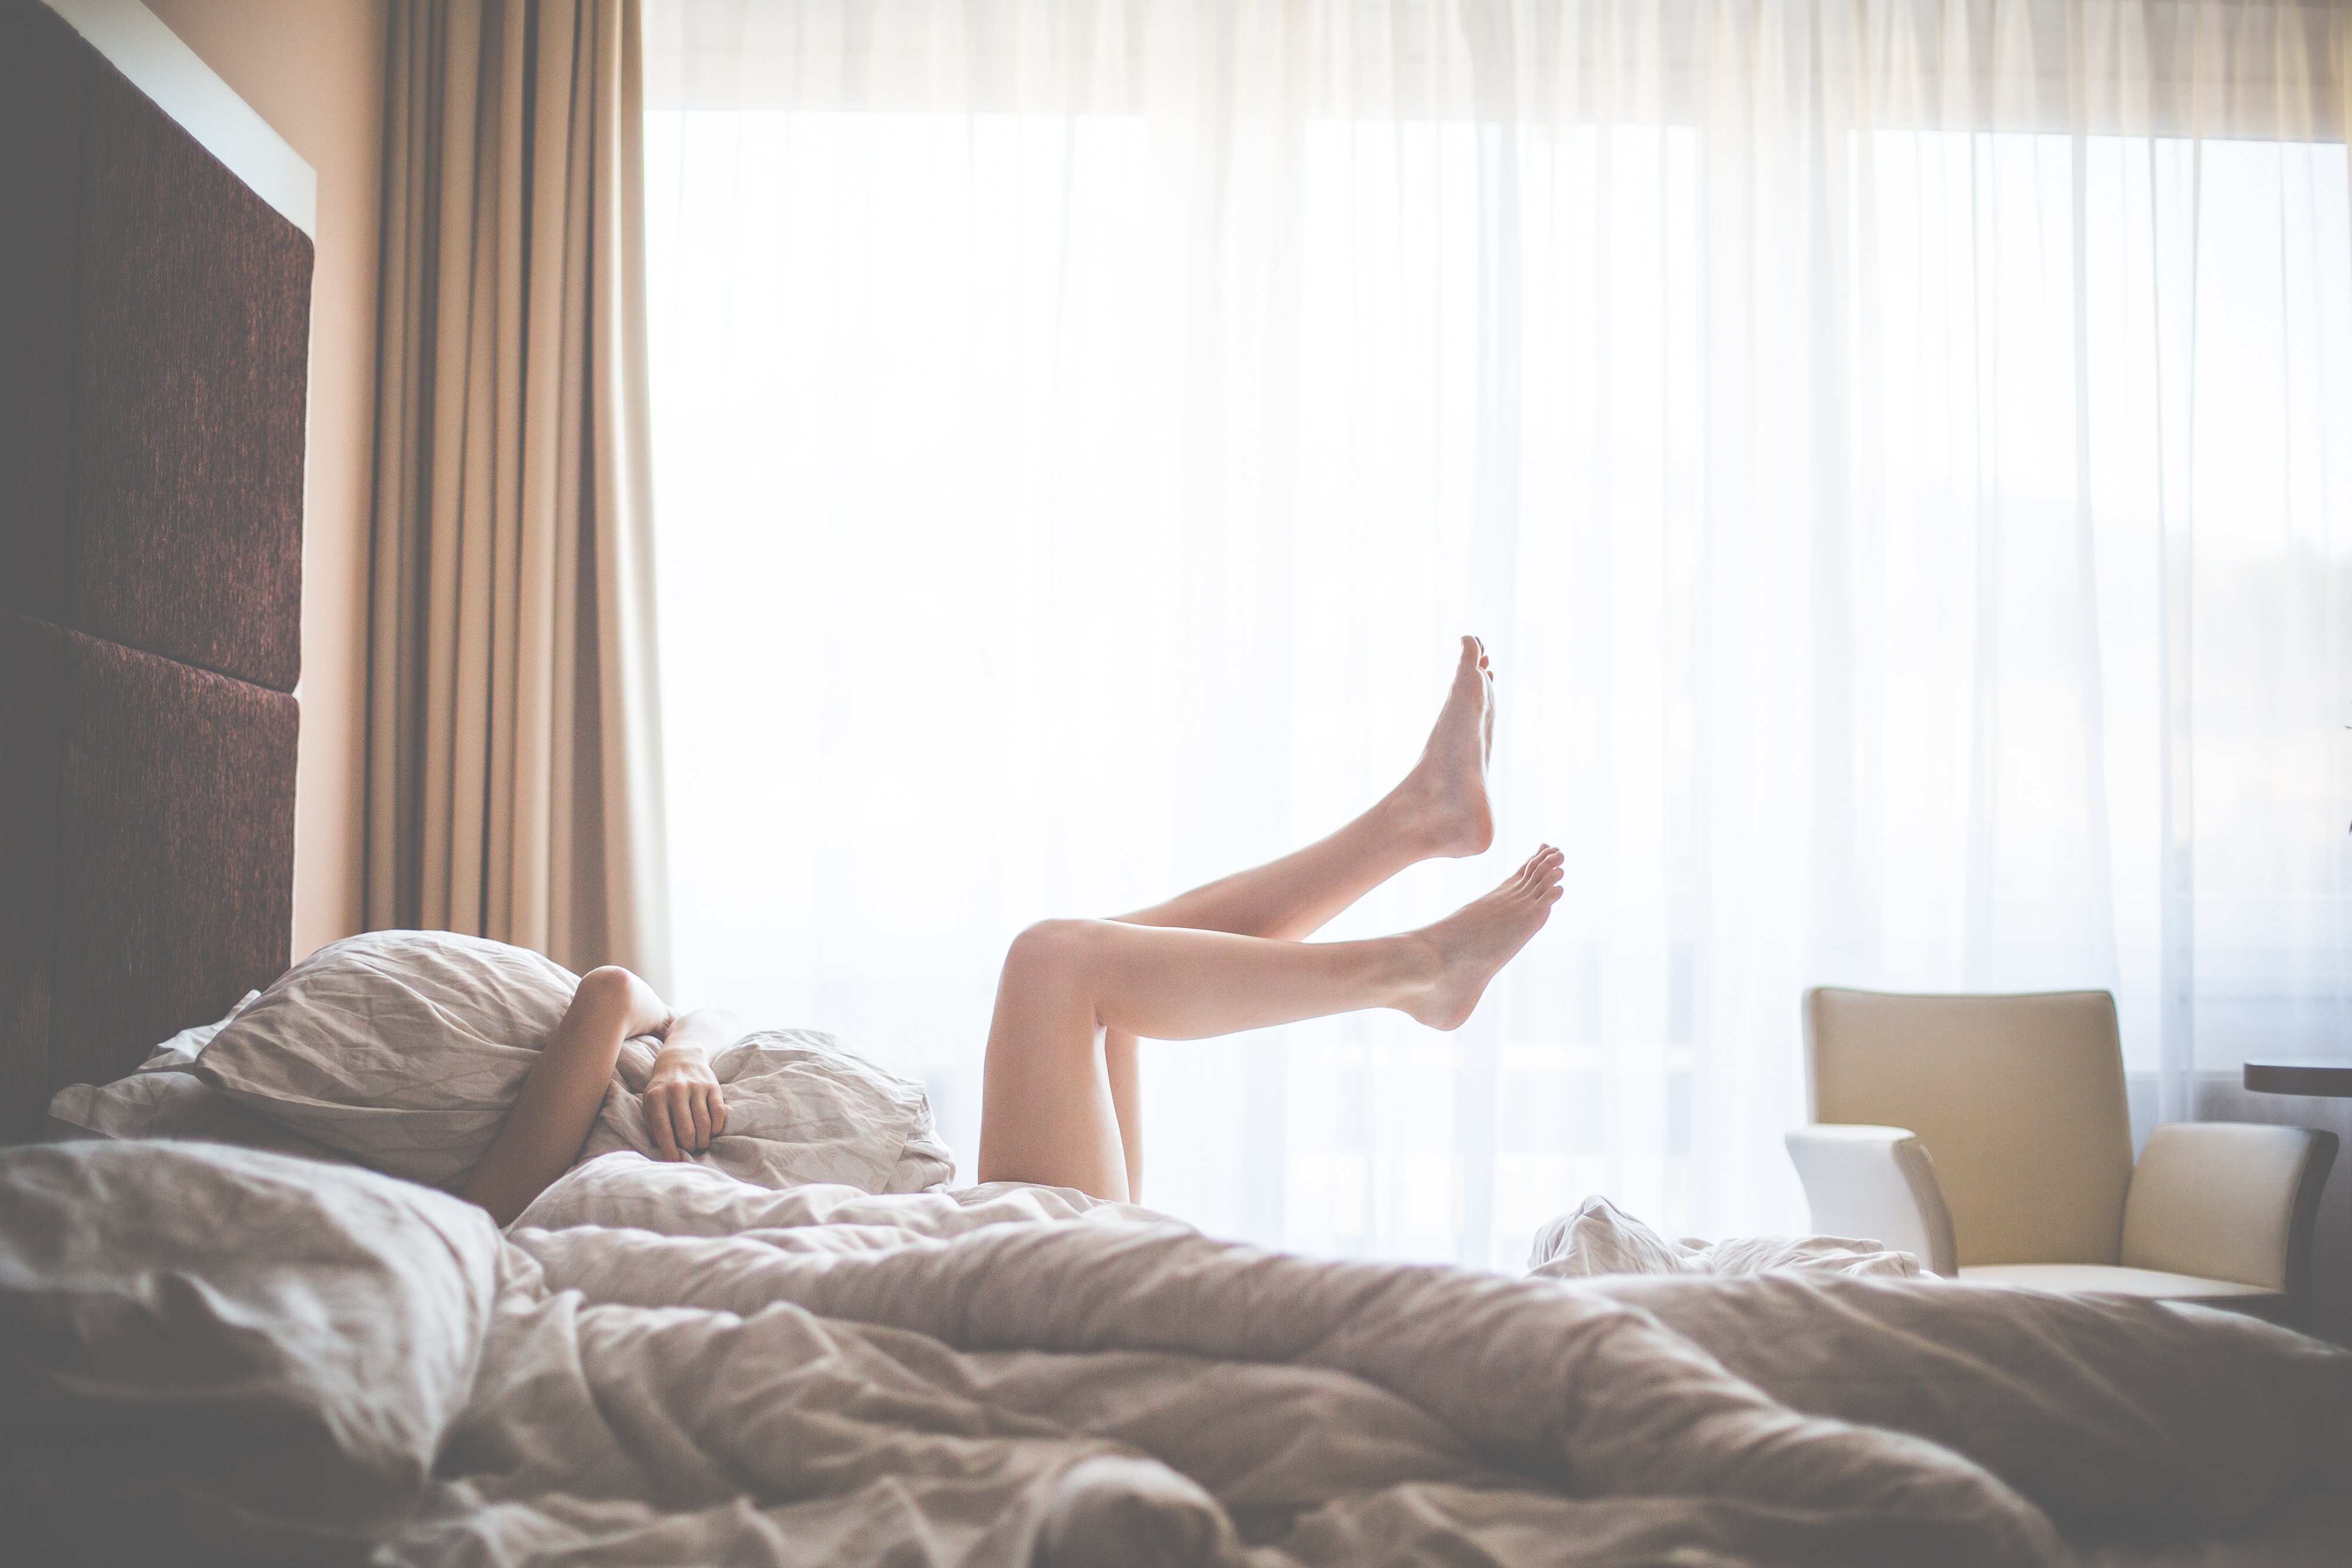 5 Morning Motivational Hacks You Absolutely Have to Try